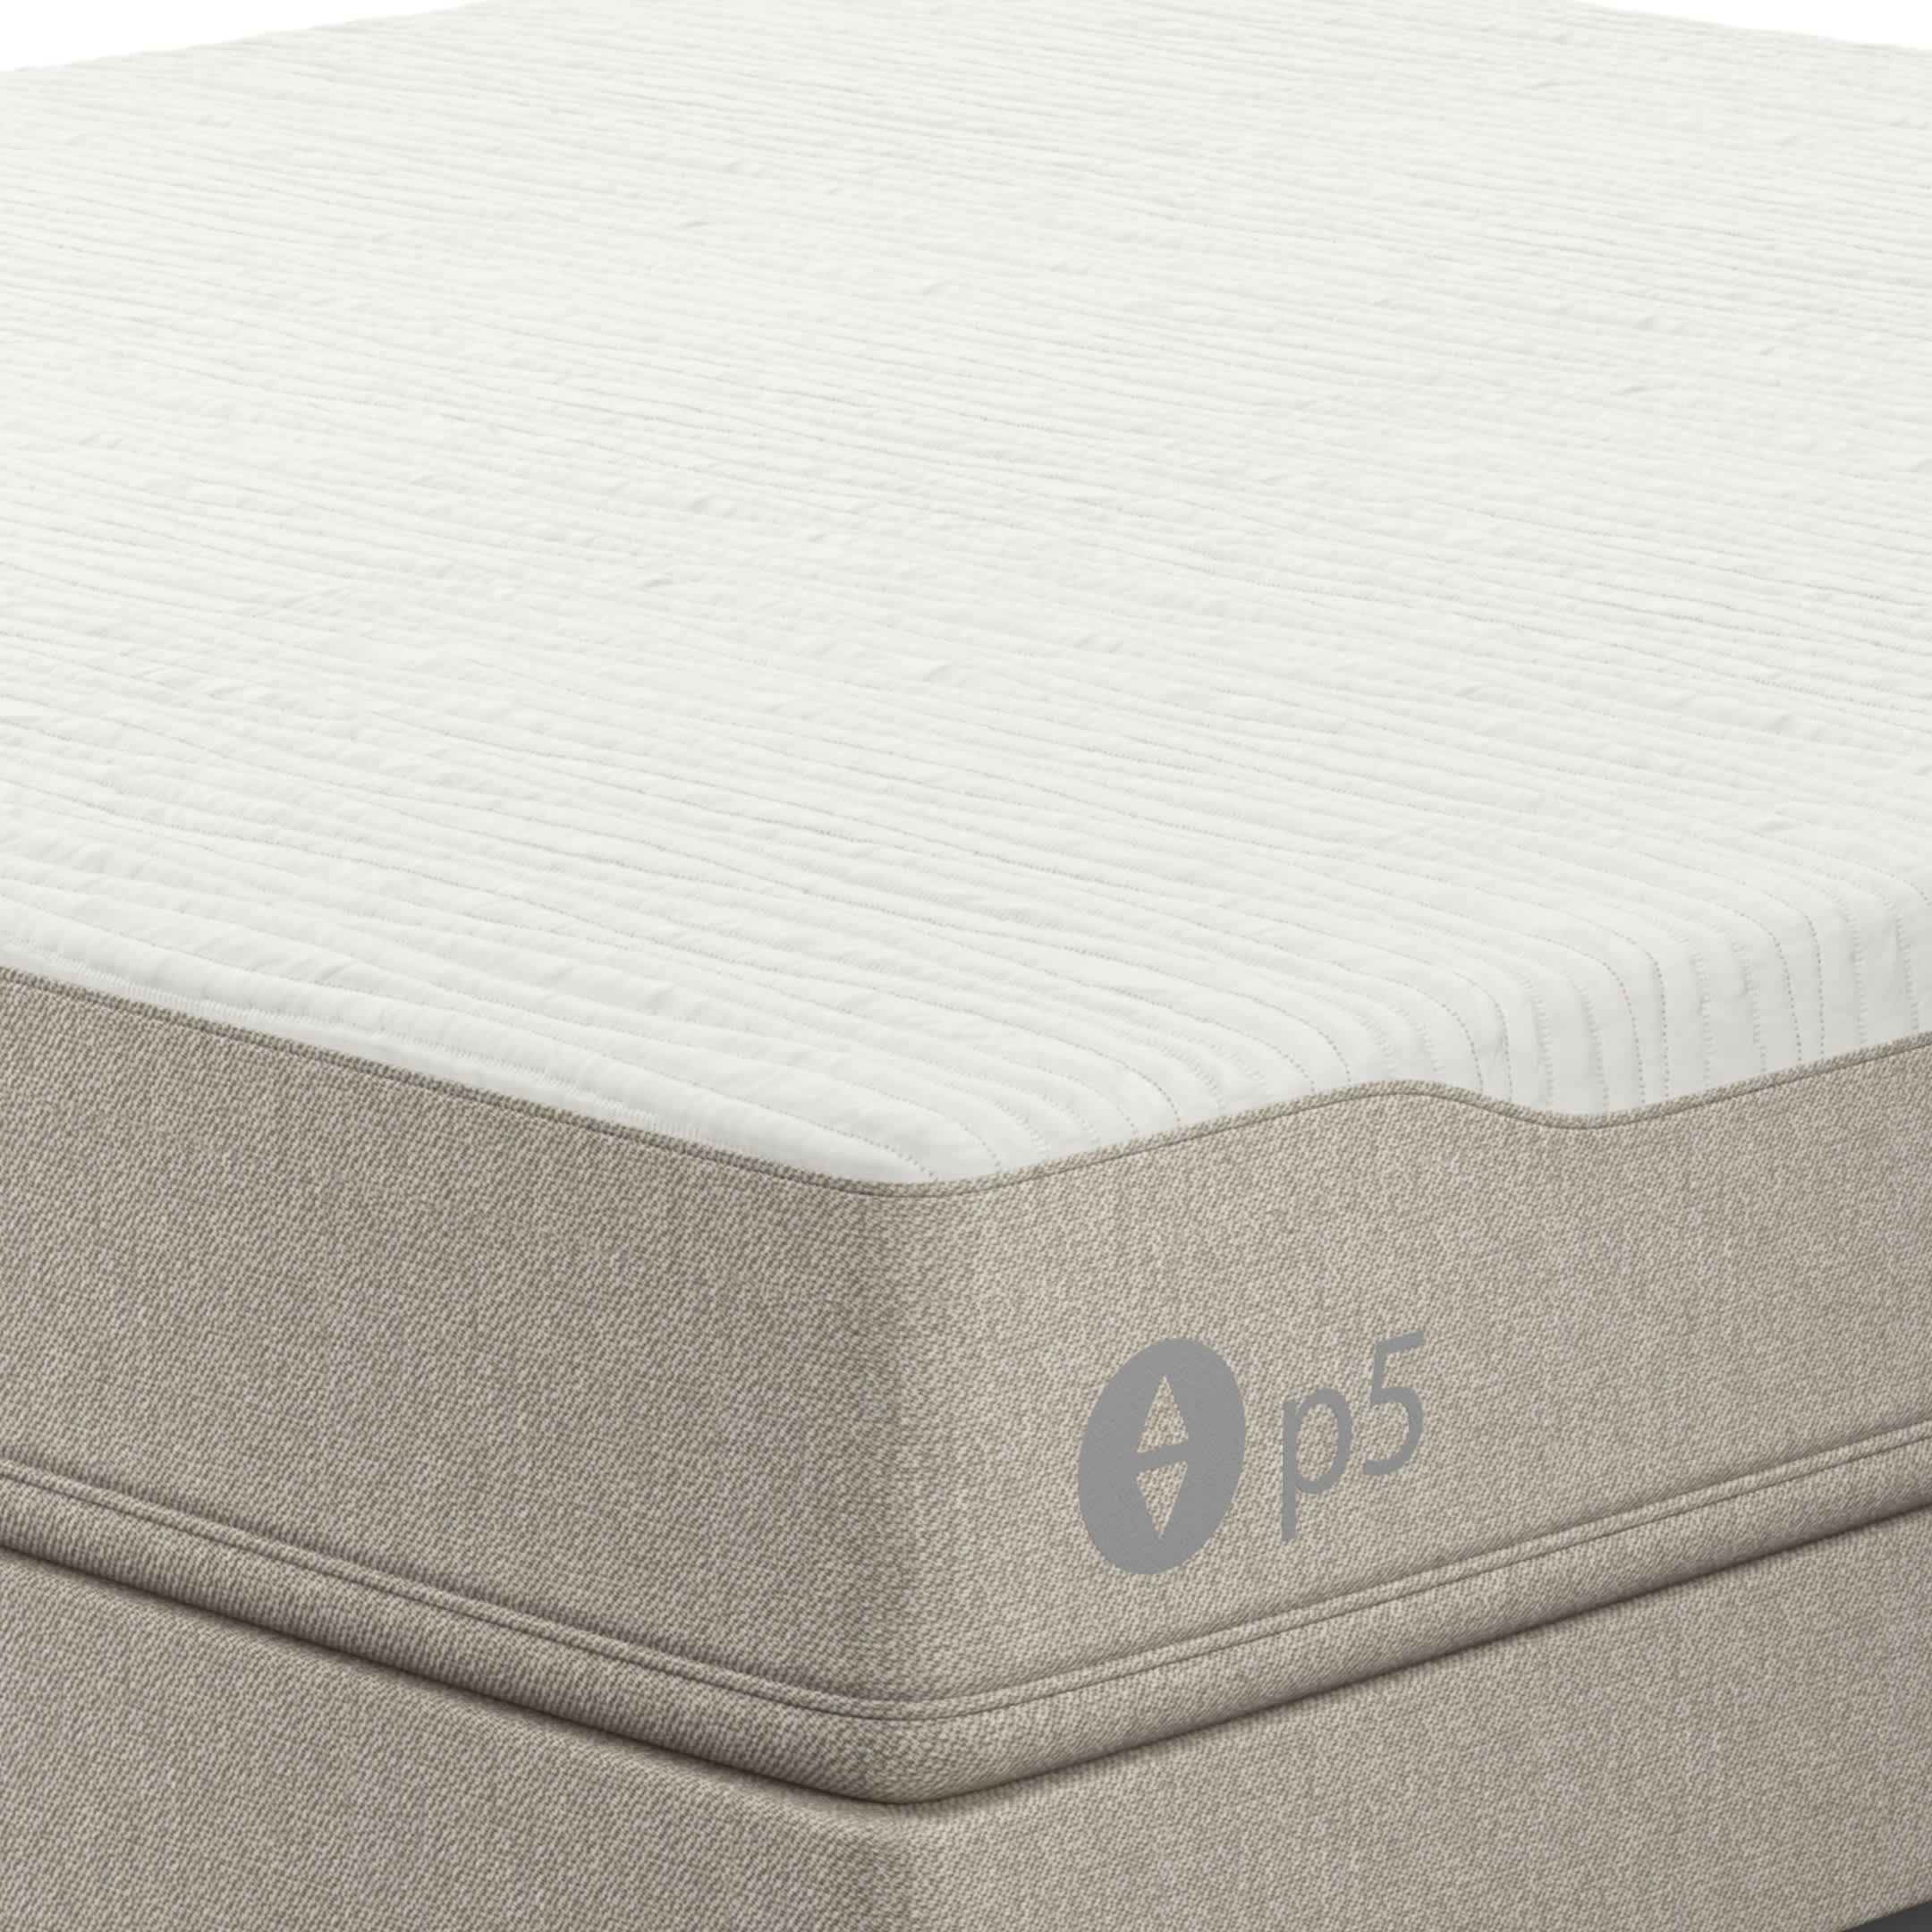 sleep number 360 p5 mattress and integrated base